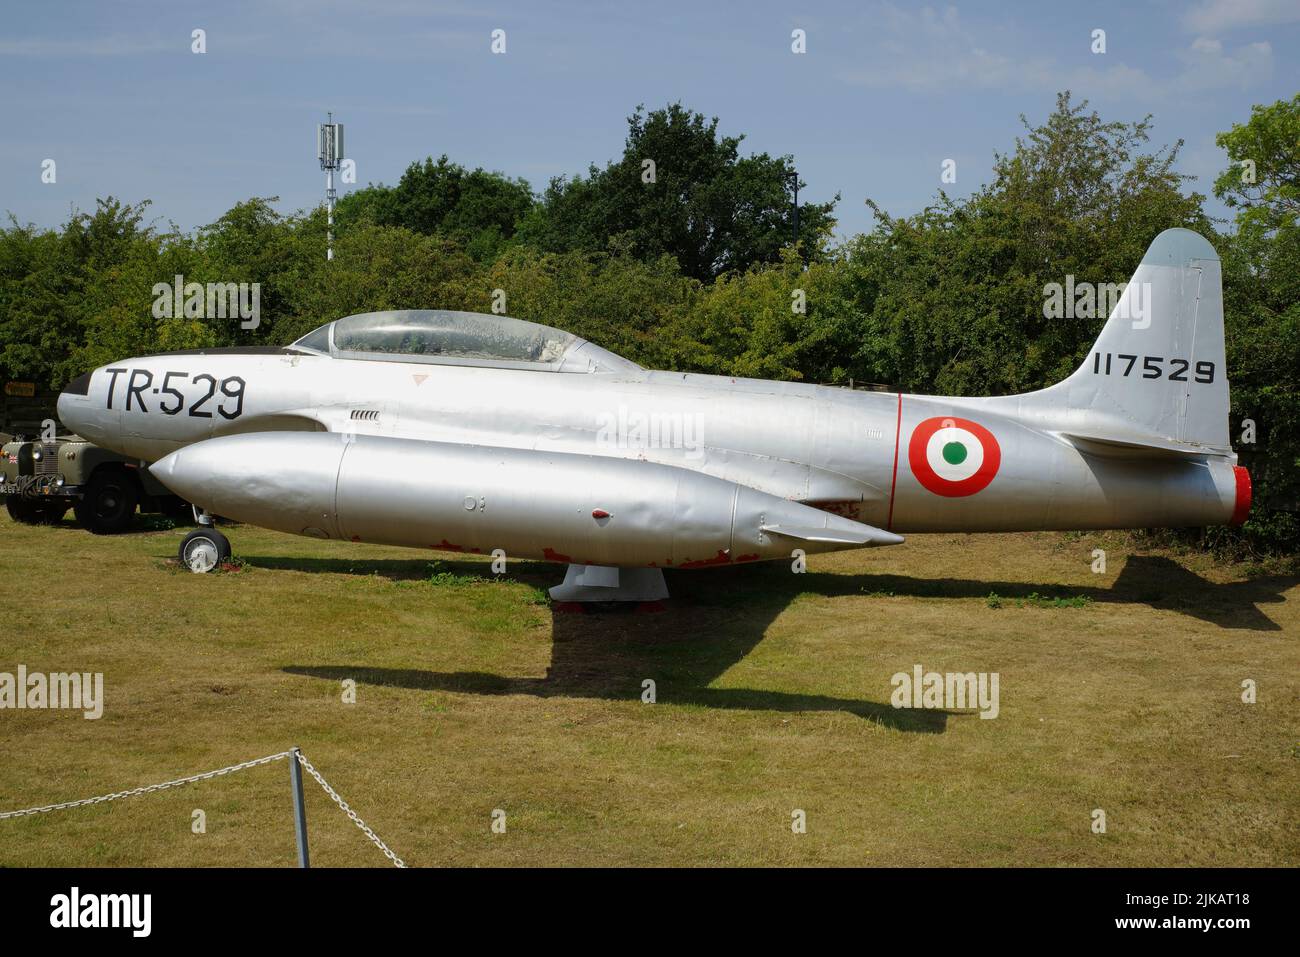 Lockheed T-33 Shooting Star 51-7473, Midland Air Museum, Coventry, Banque D'Images